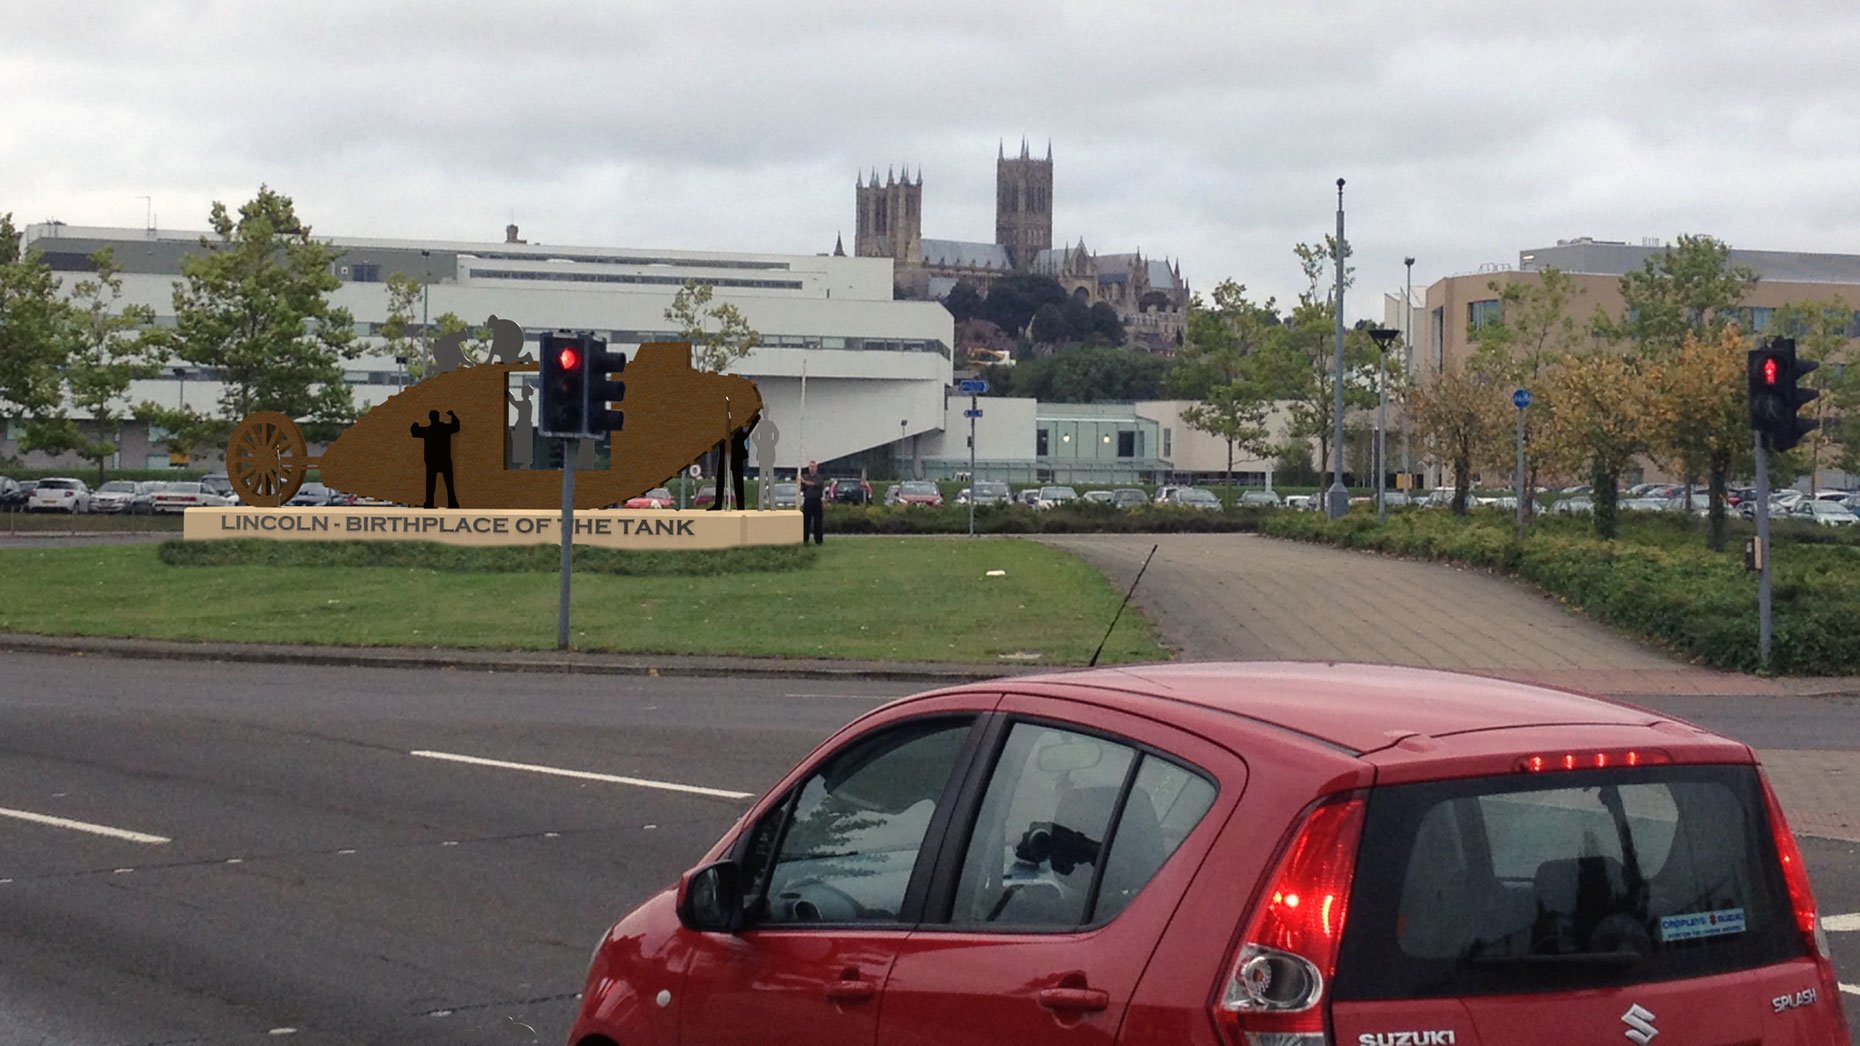 A plan of where the Lincoln Tank memorial will be positioned, on the Tritton Road roundabout.